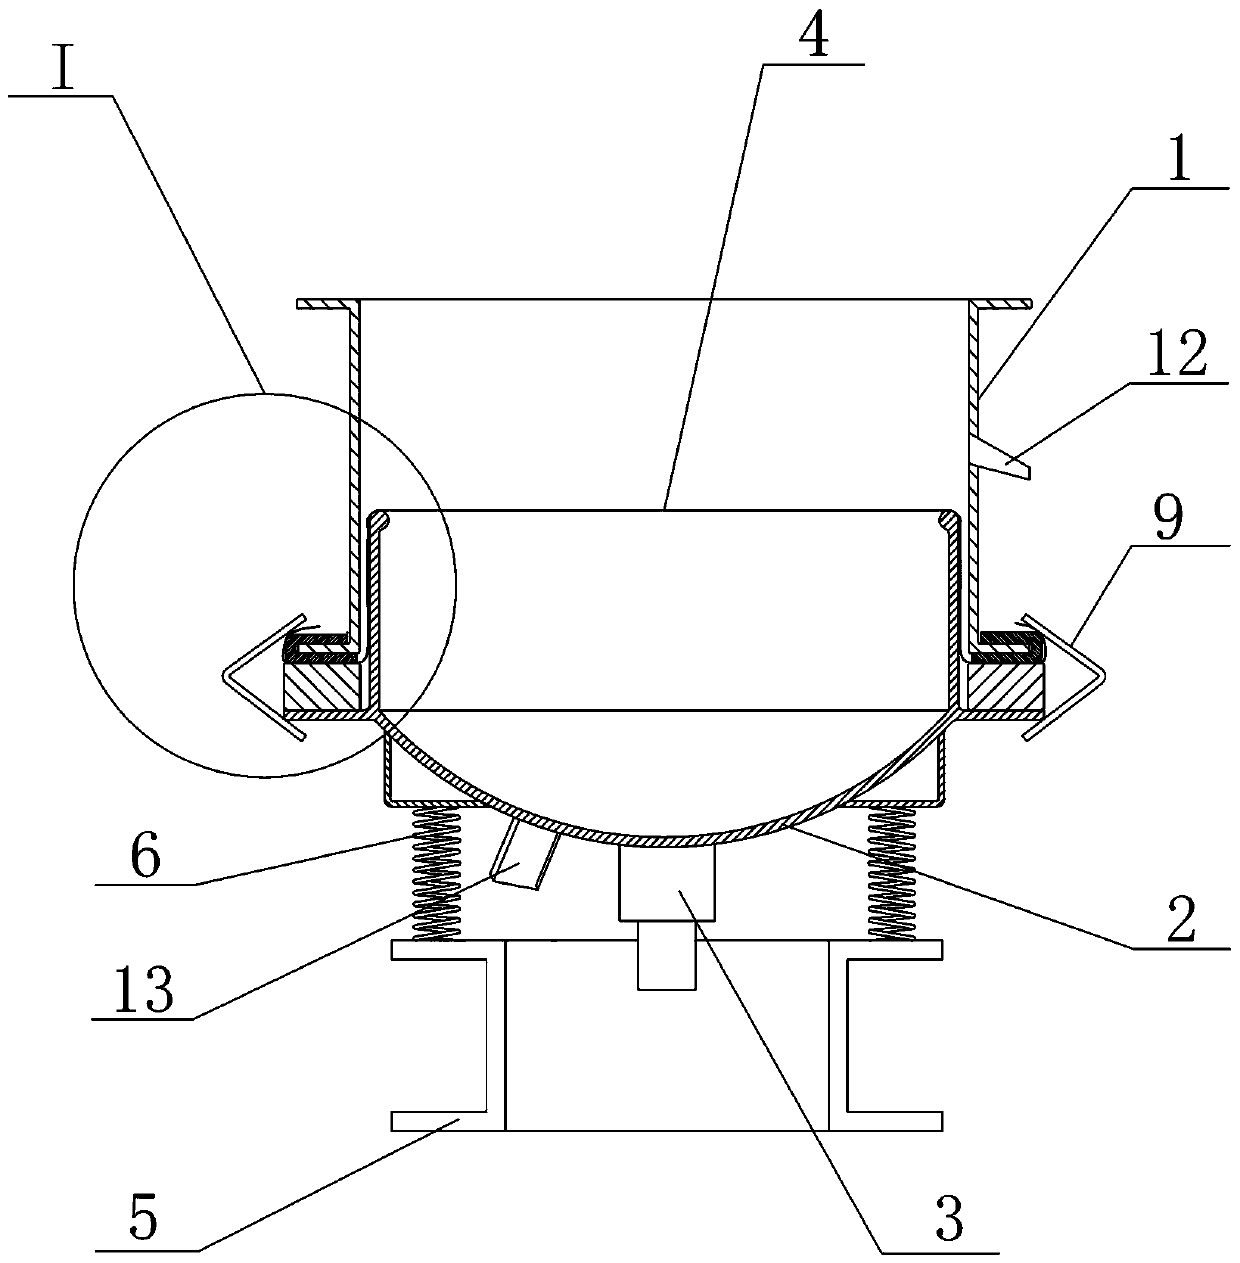 Vibration sieve and method for adopting thick glue to compress and tighten screen